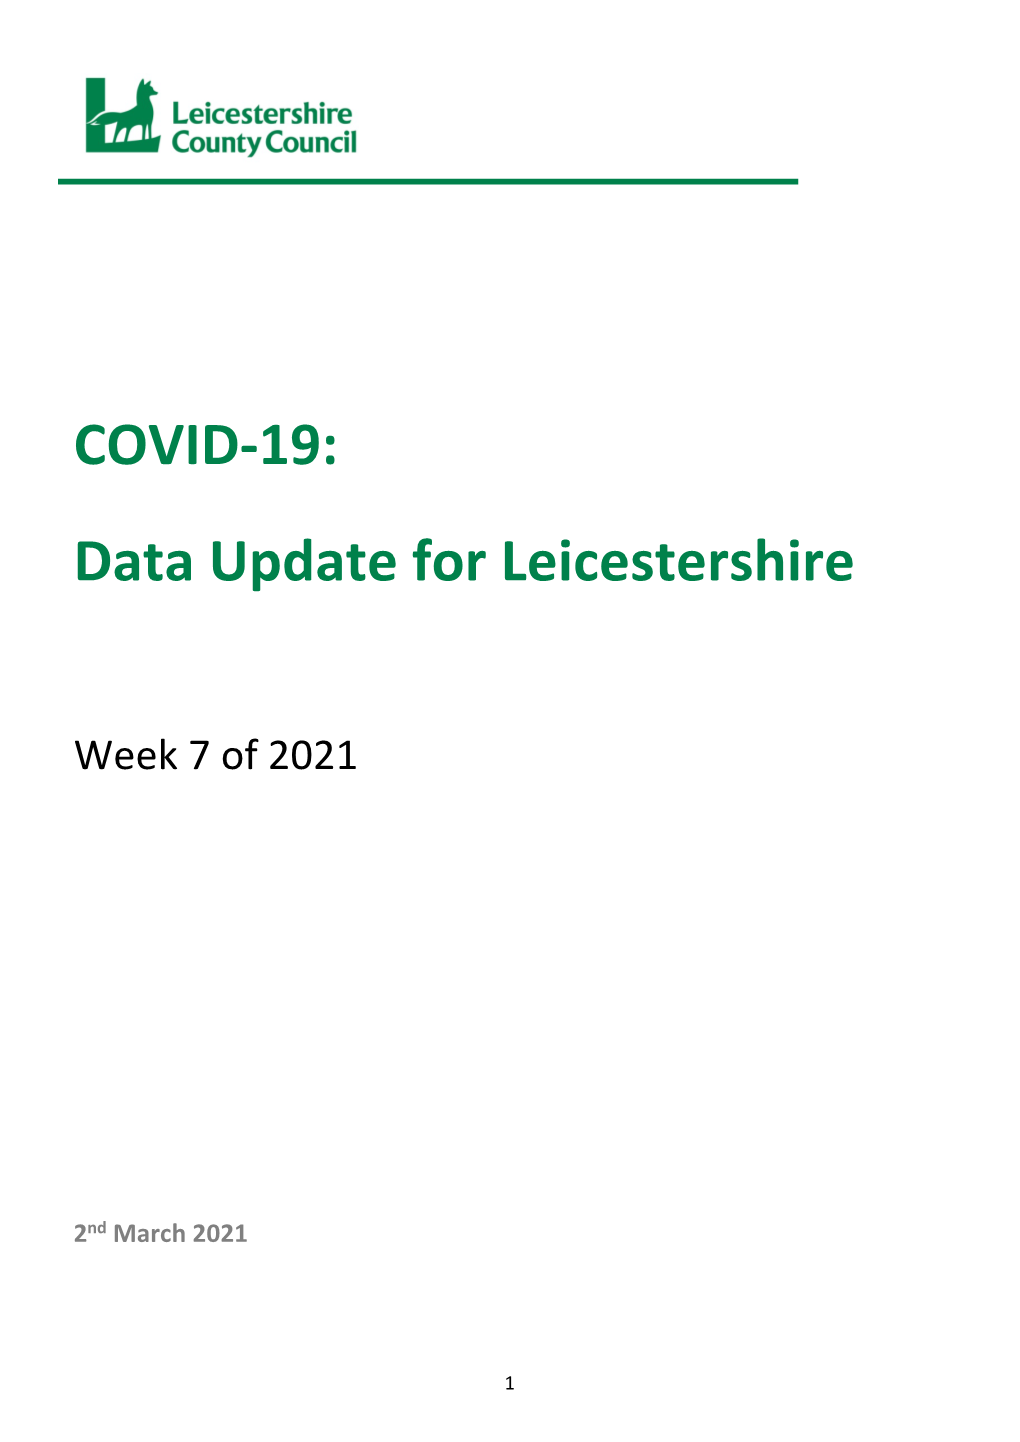 COVID-19: Data Update for Leicestershire